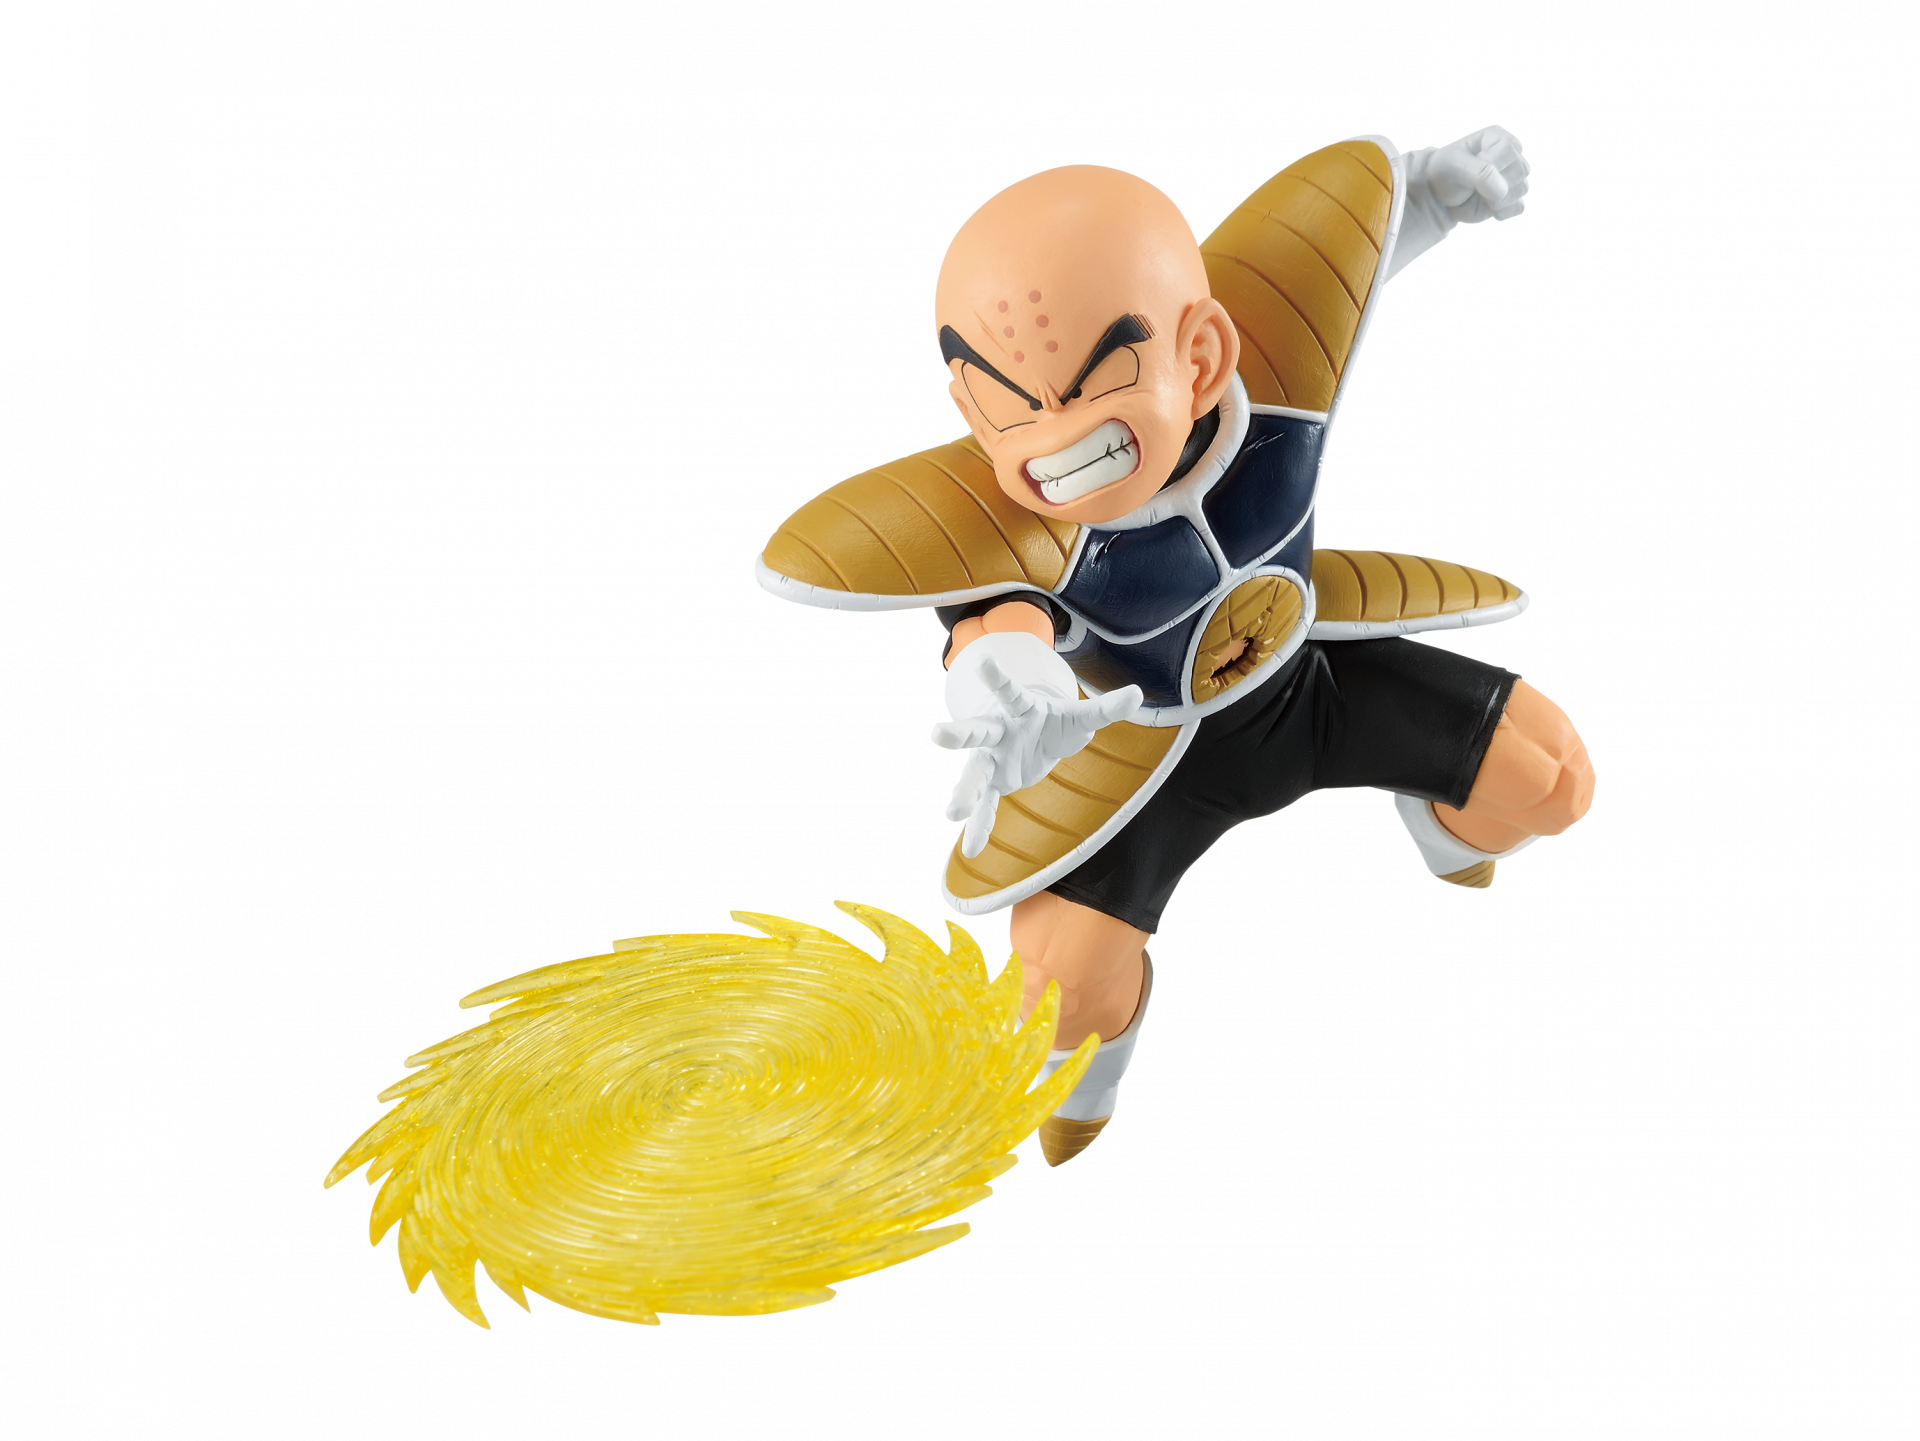 Krillin Joins the G×materia Series!